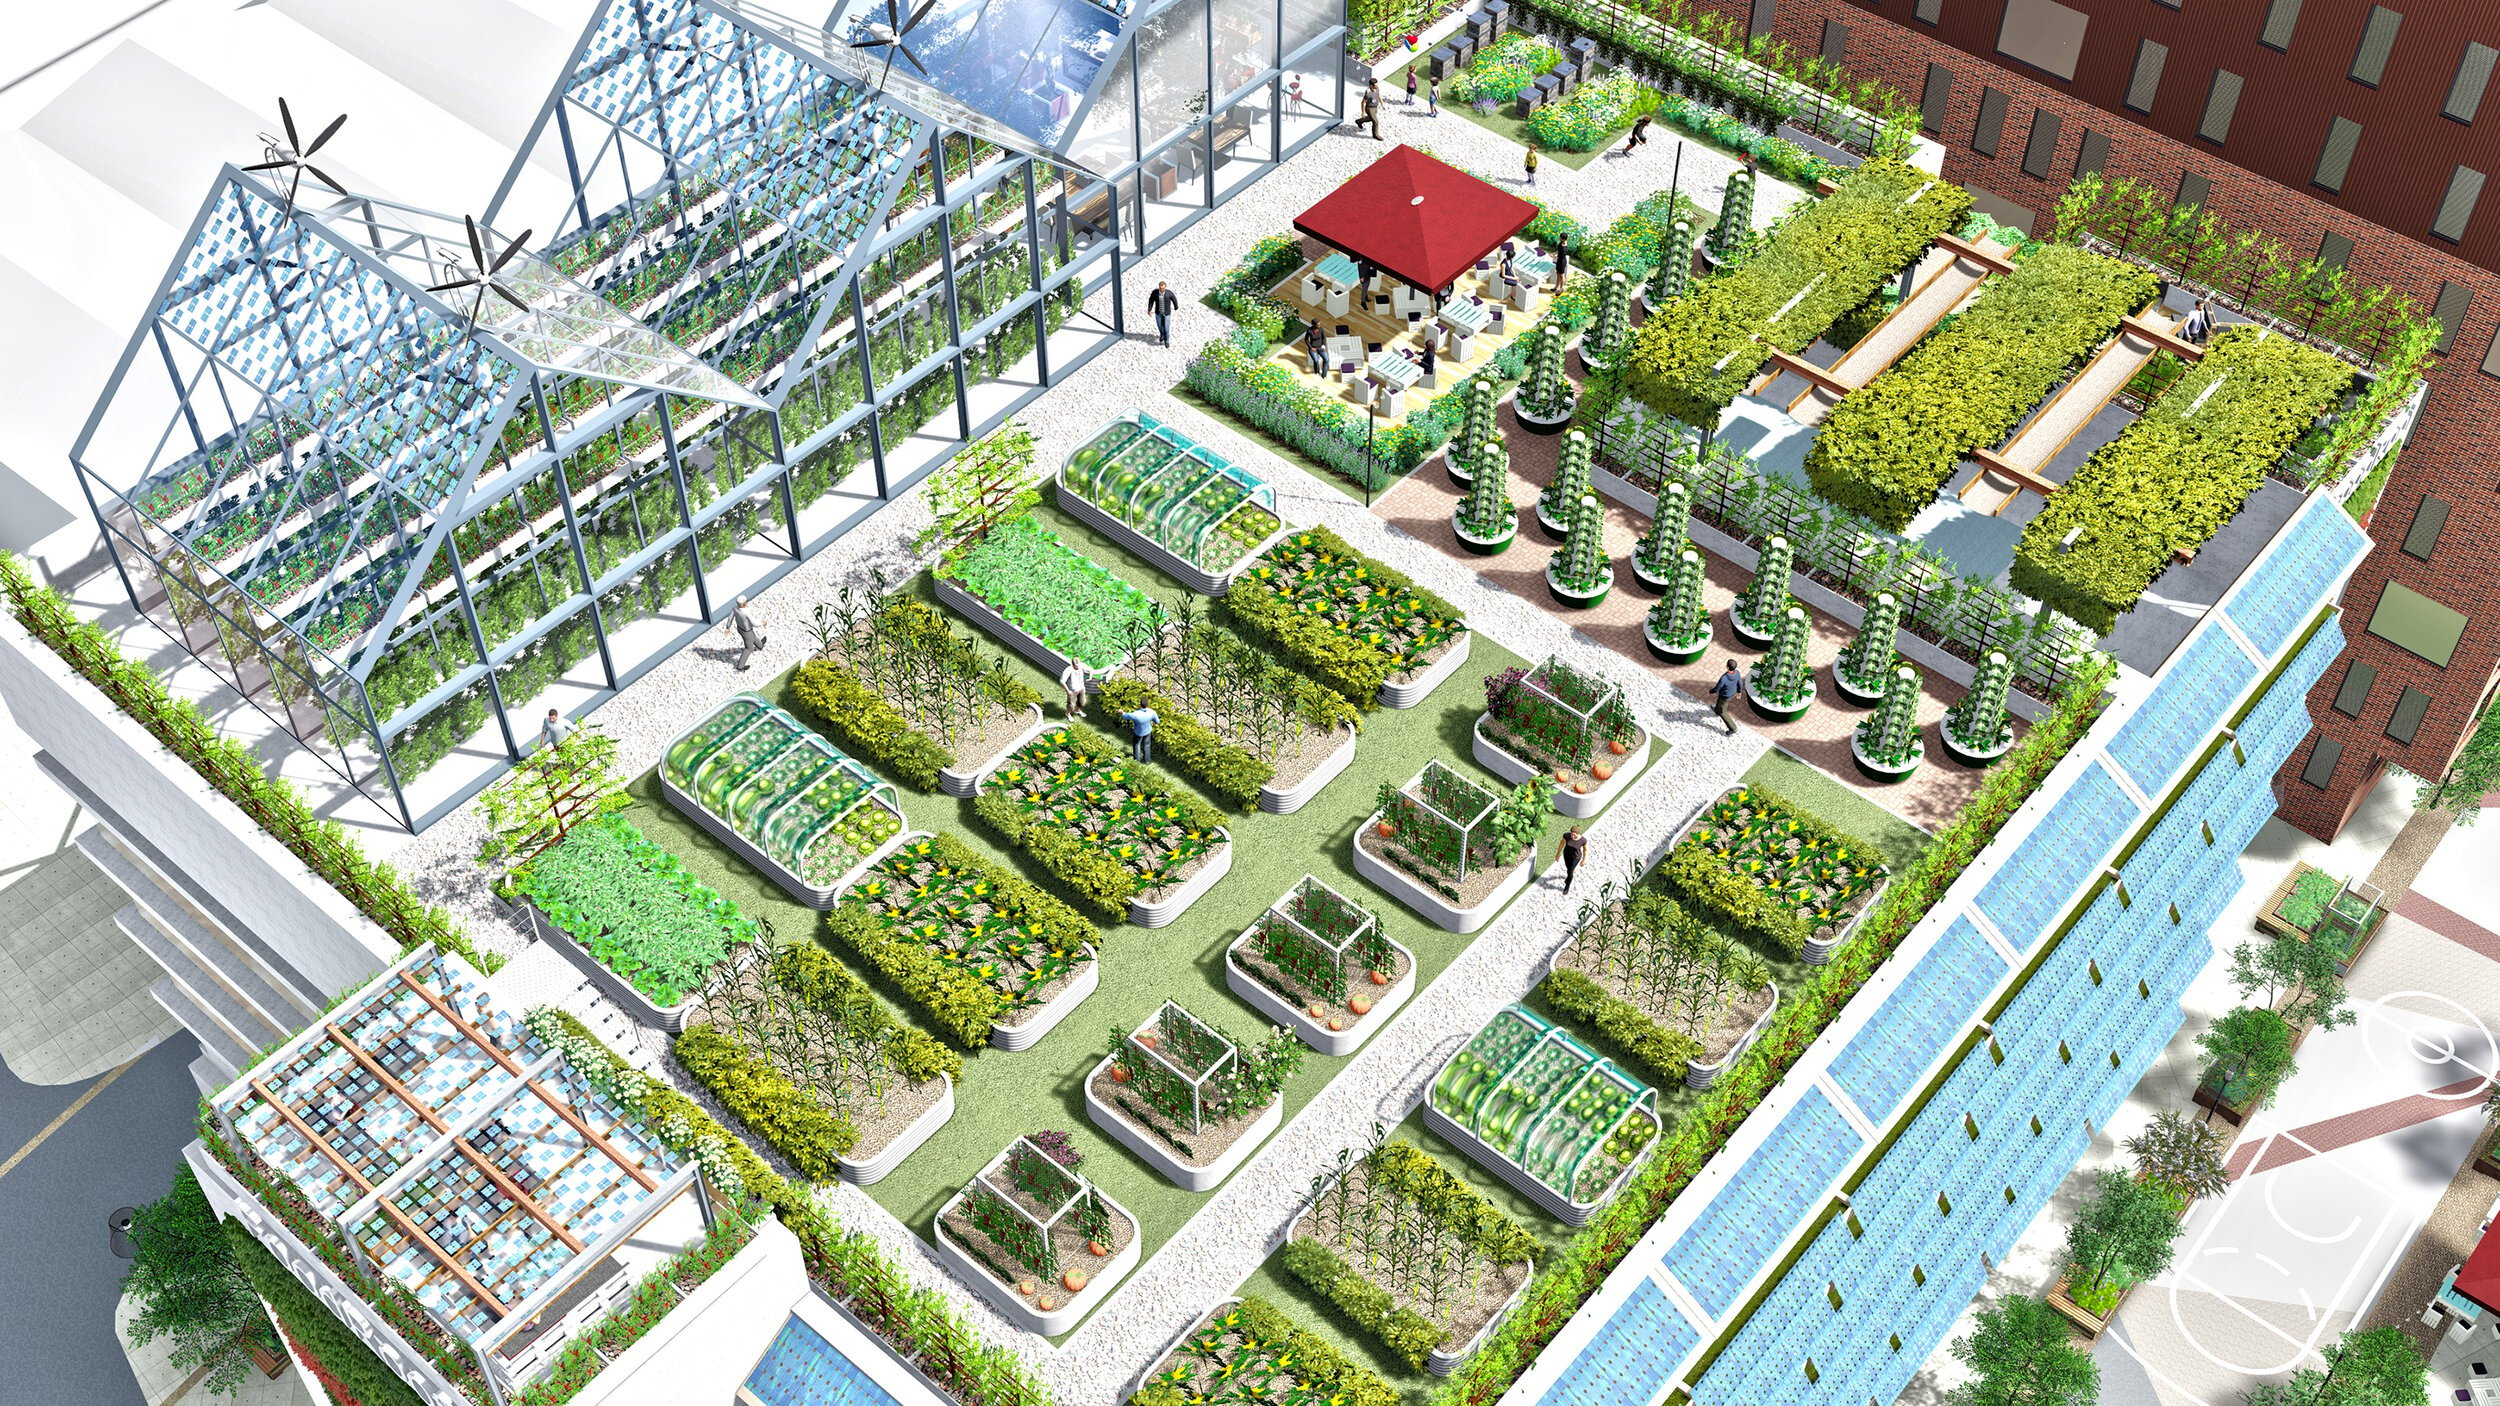 Concept by Chris Jones of Feeding Cities &amp; Brian McCarthy of Cork Rooftop Farm